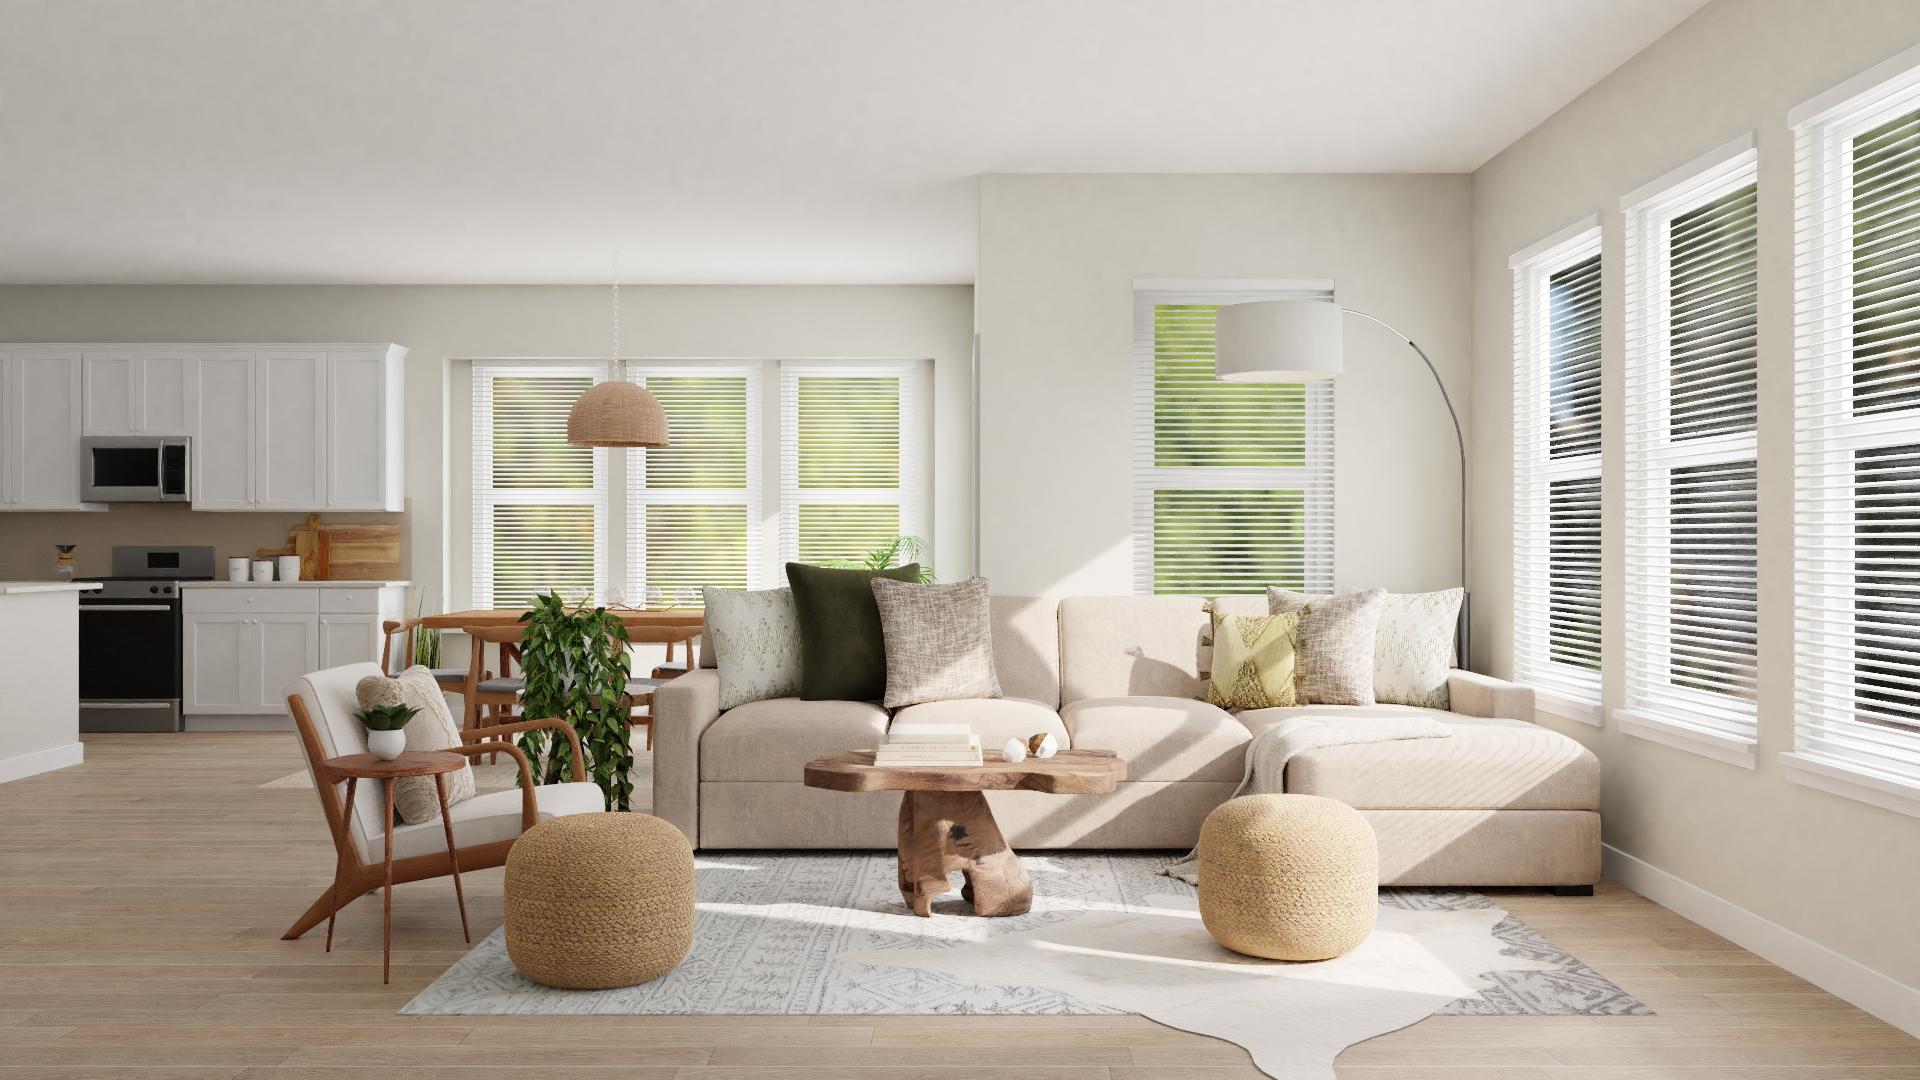 An Open Space for This Scandinavian Living Room